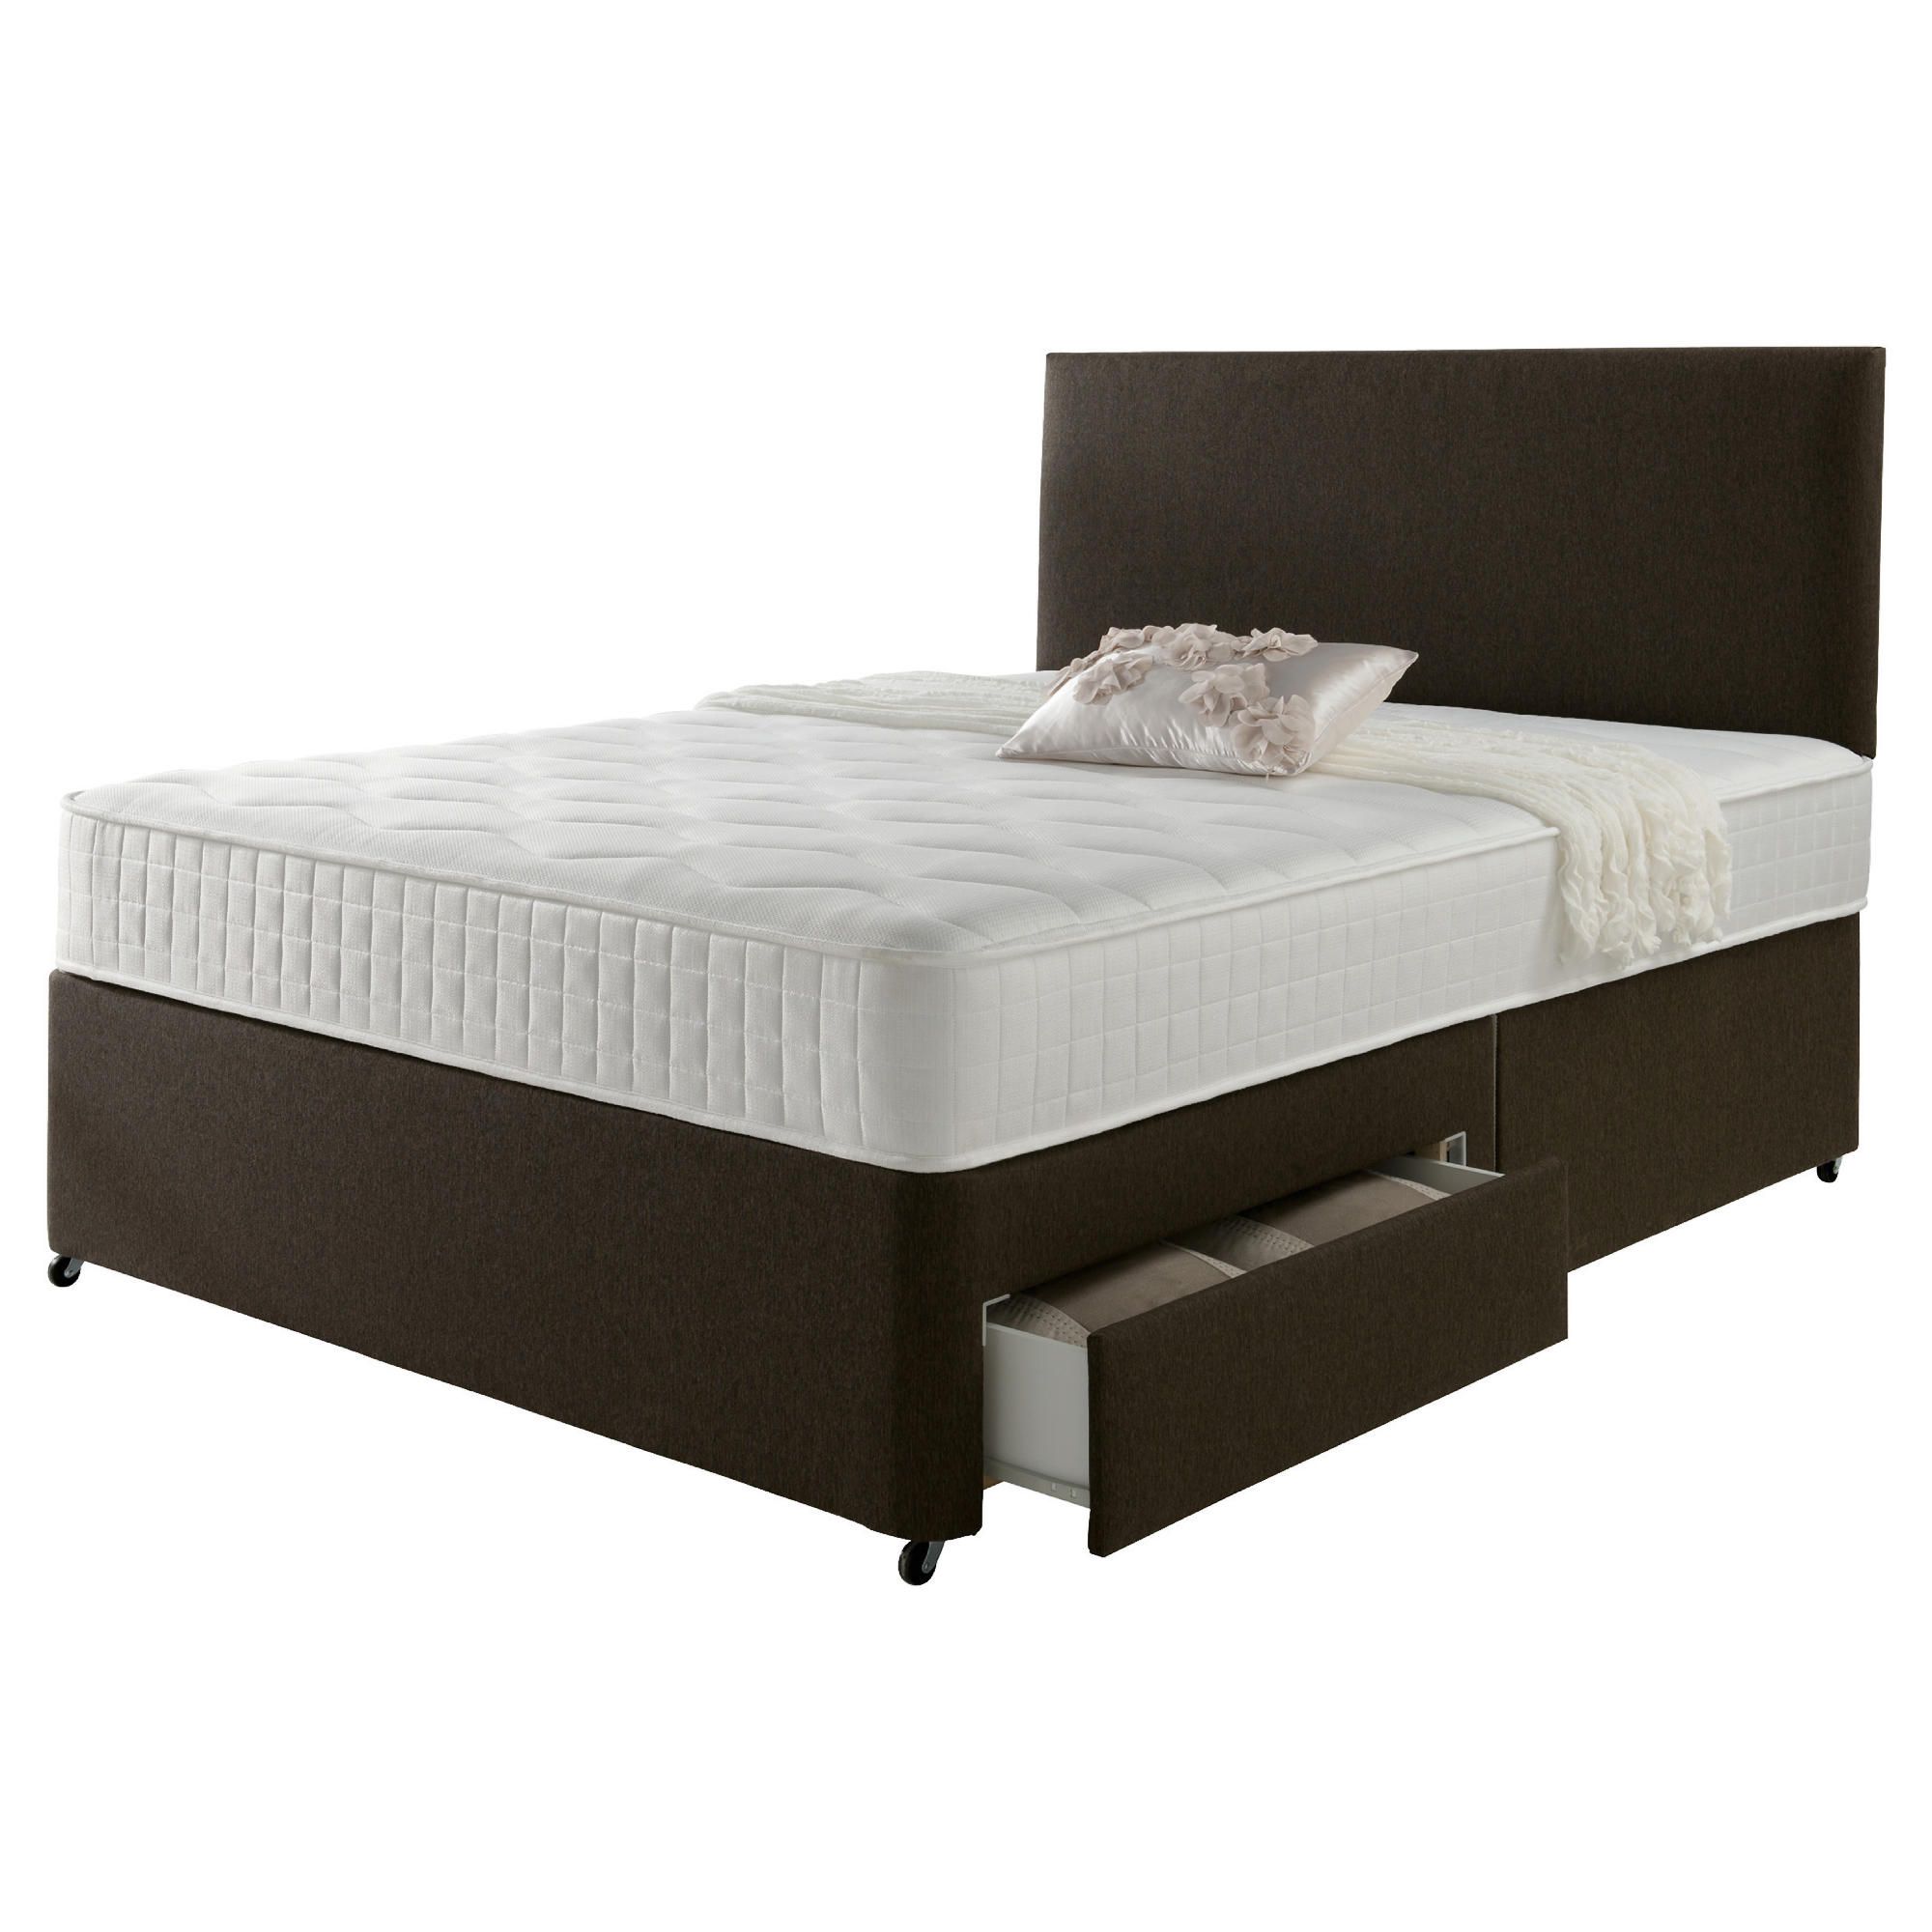 Rest Assured Memory 2 Drawer Double Divan and Headboard Chestnut at Tesco Direct